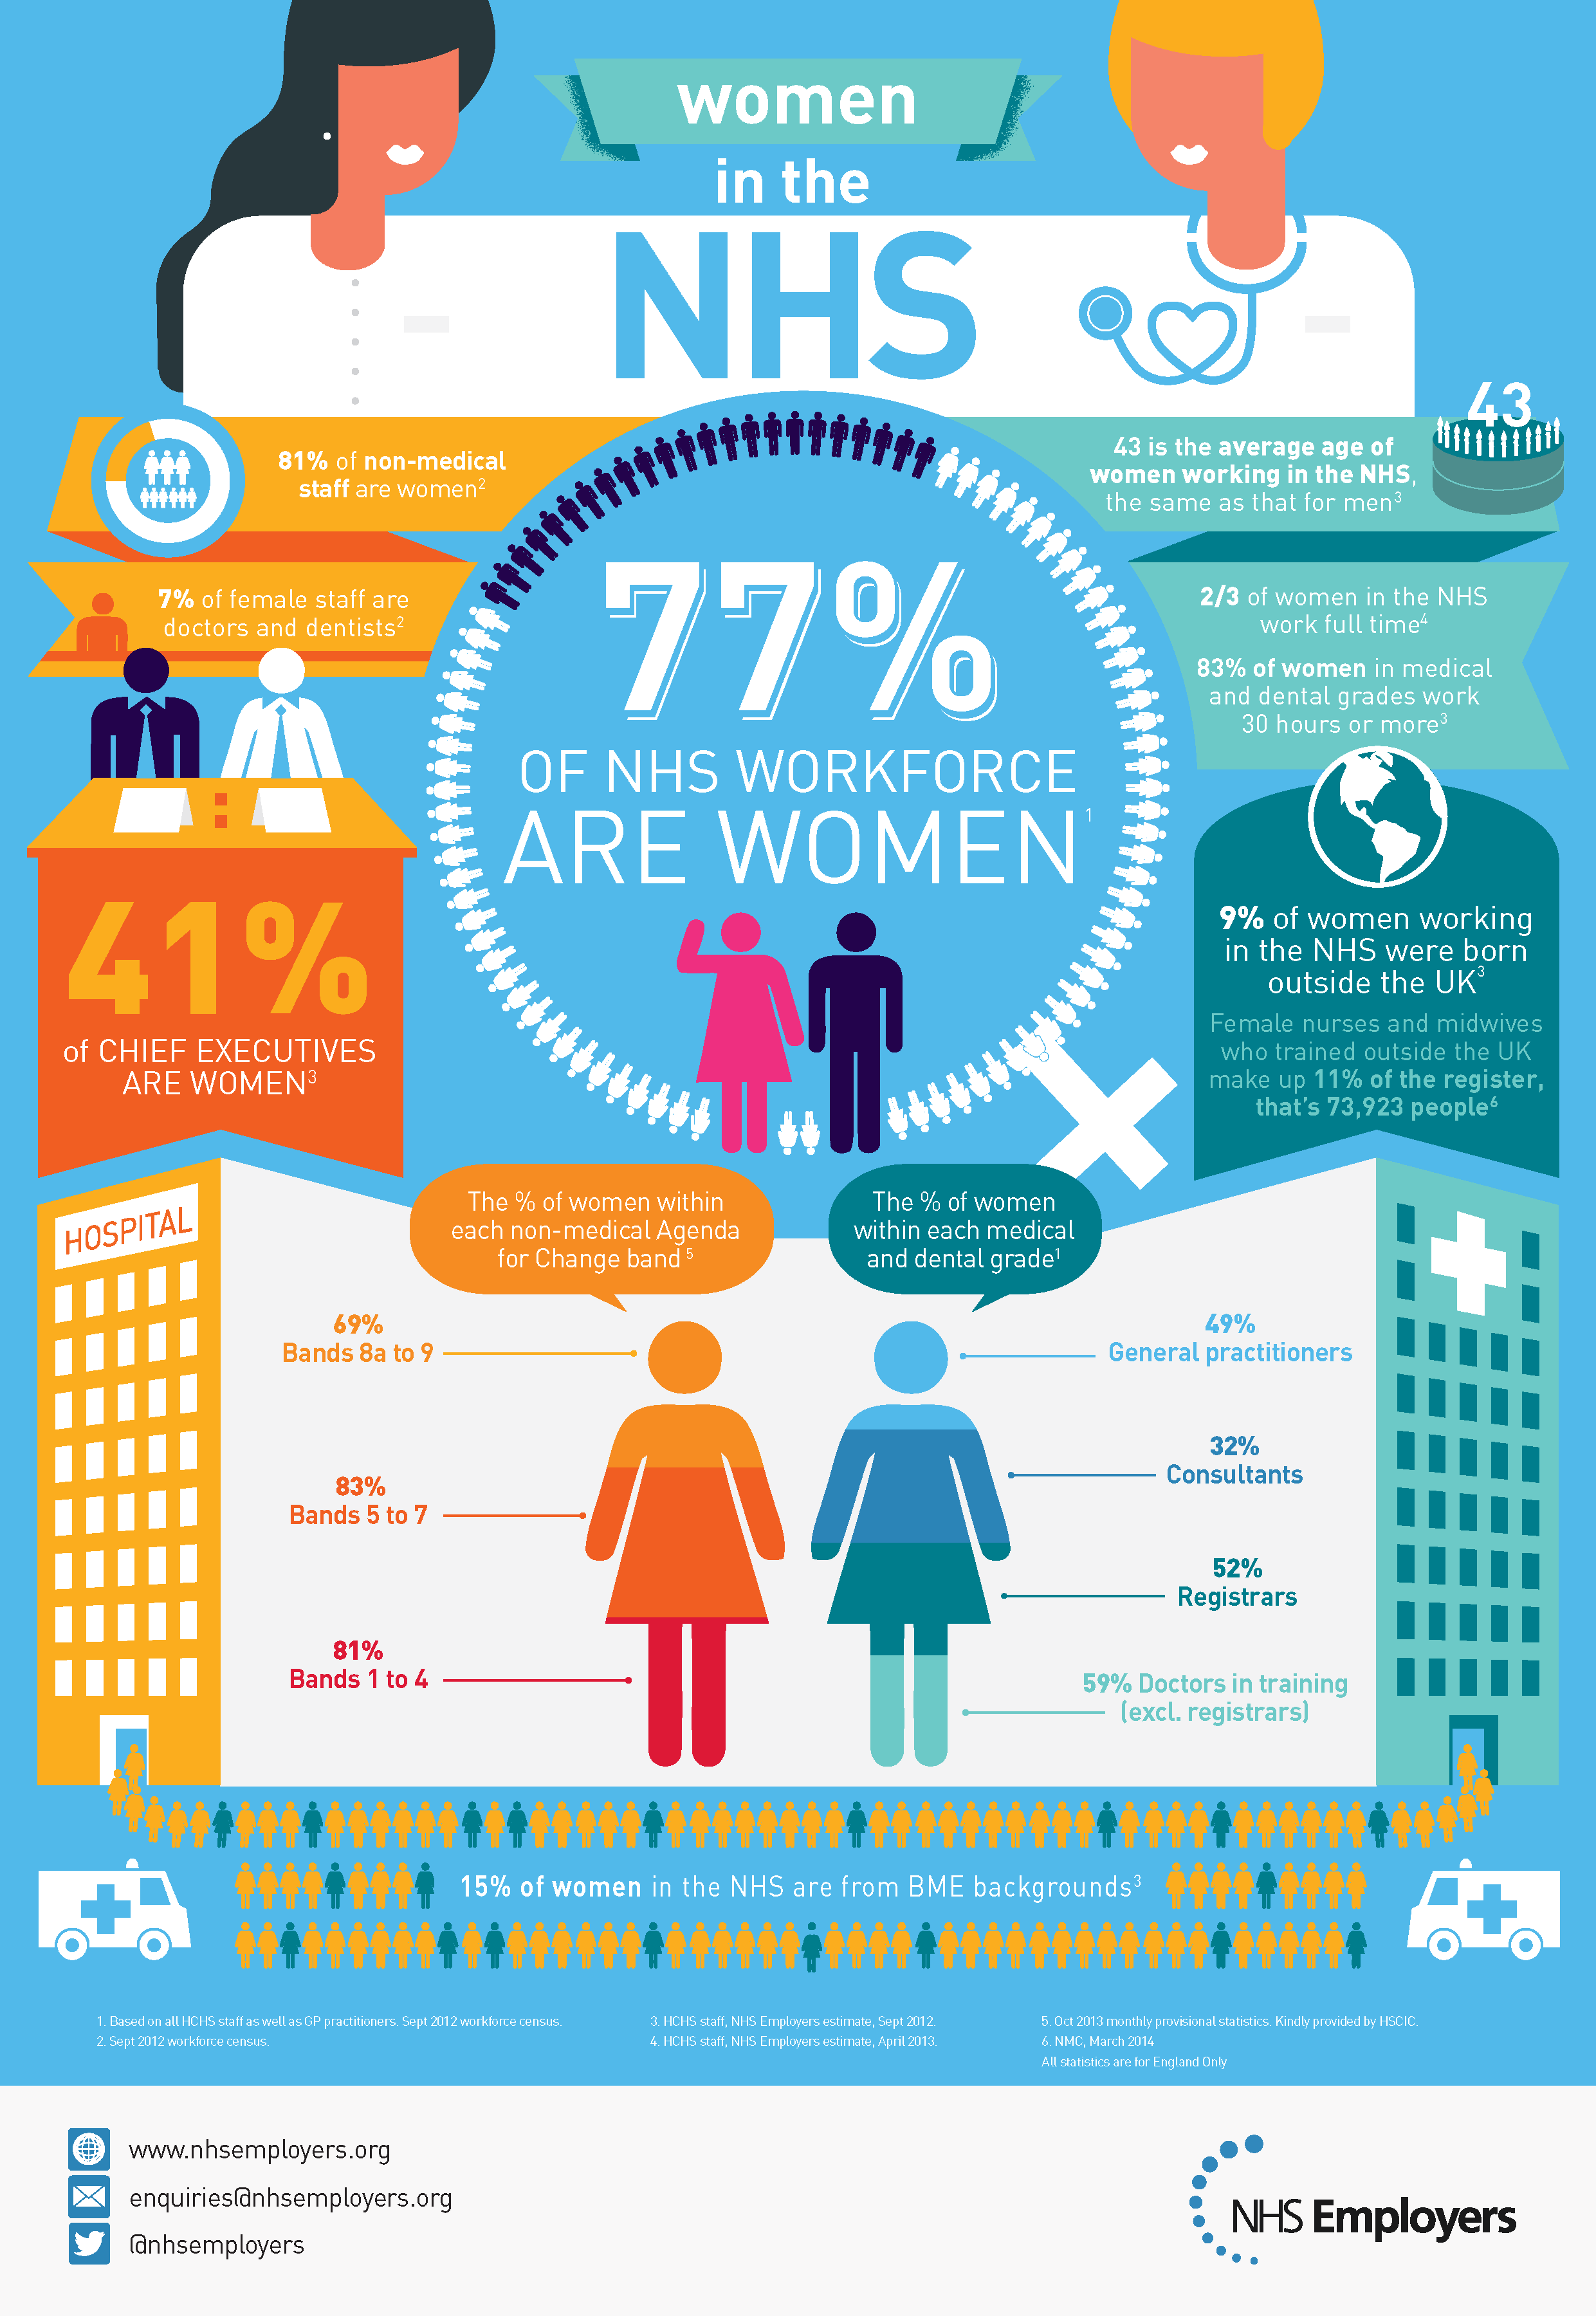 How To Support Women In Tech [Infographic] - Business 2 Community